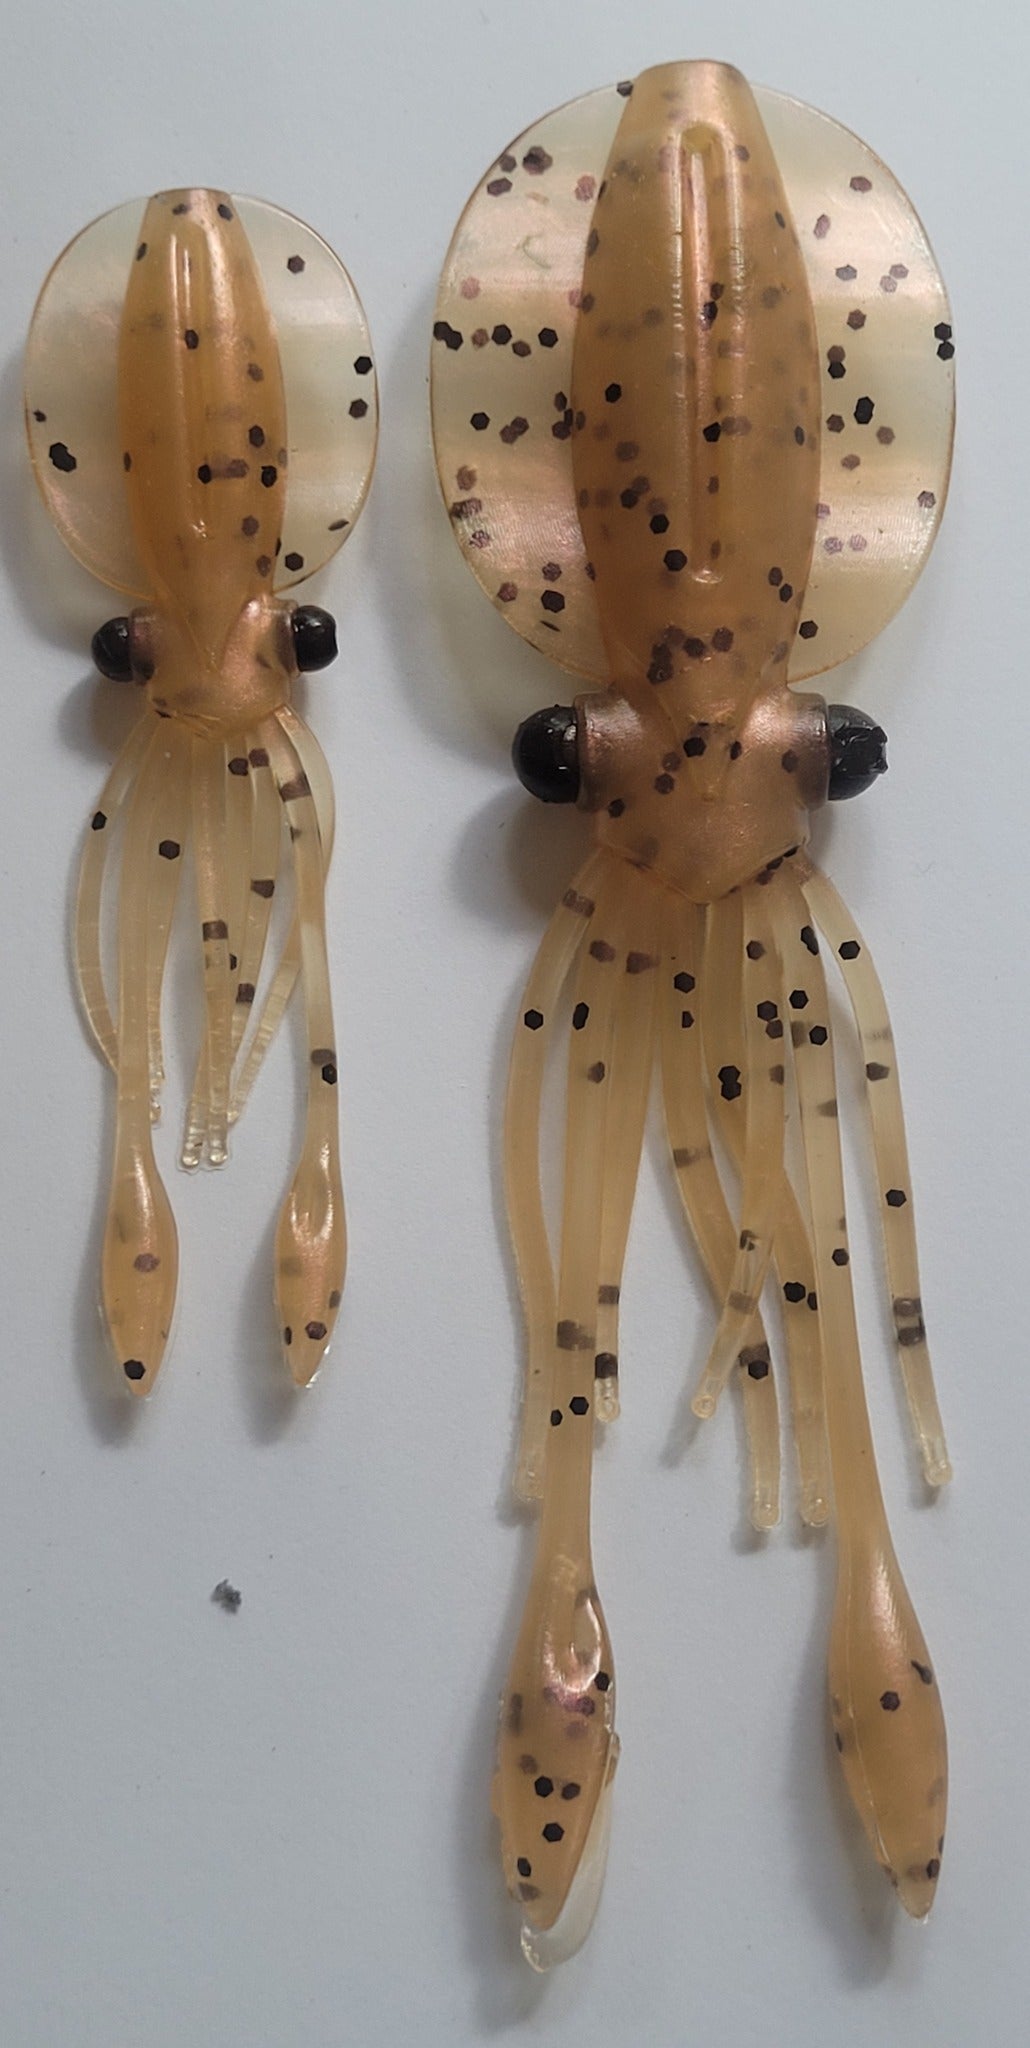 Trickys Lures - Squidly Squid shaped soft plastic